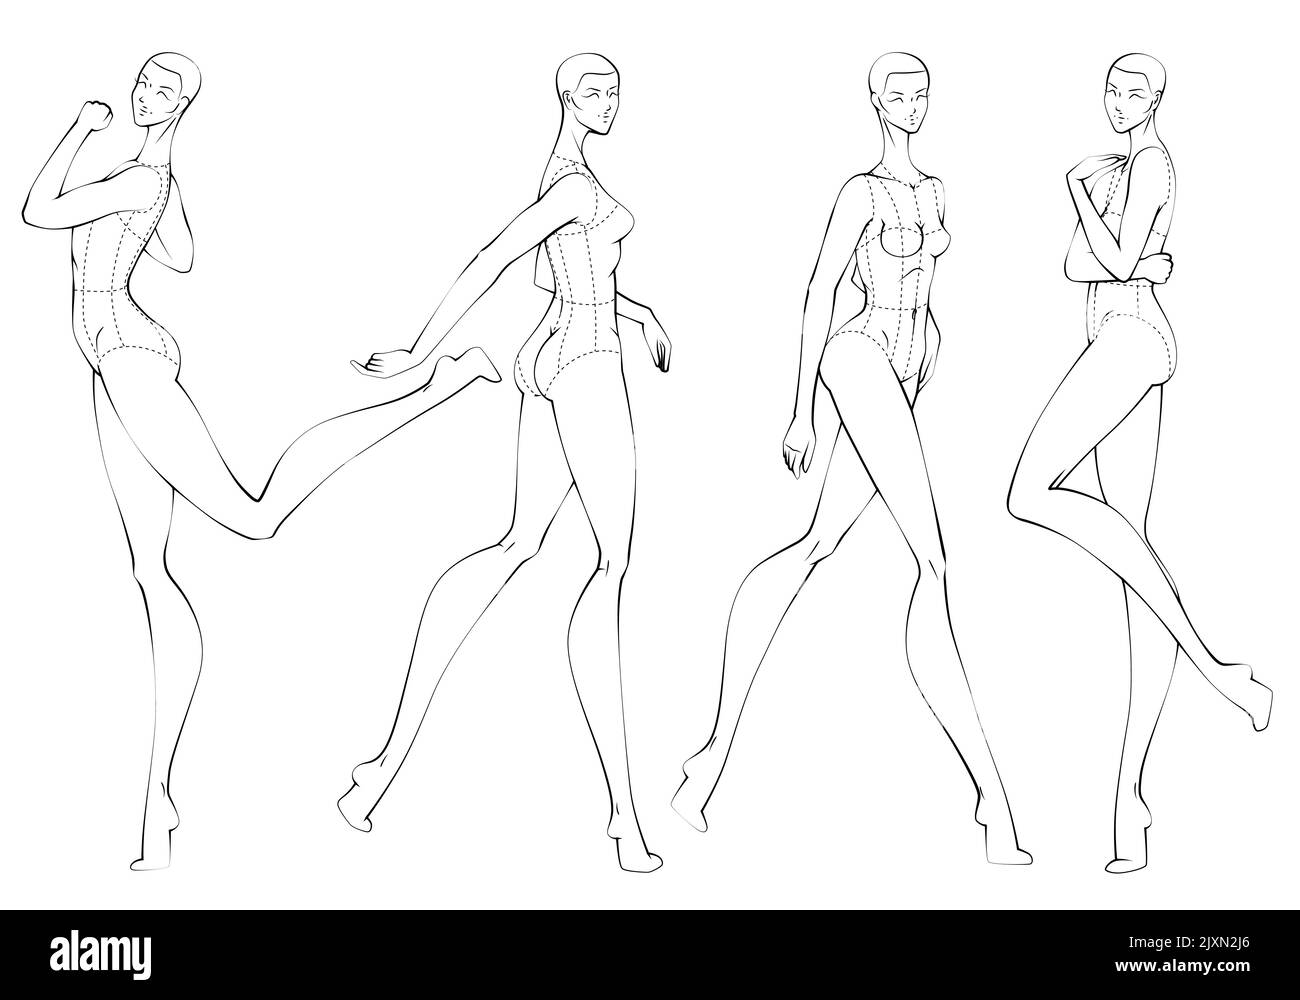 Model poses for life drawing - Gesture Drawing Online #006 - PaintingTube